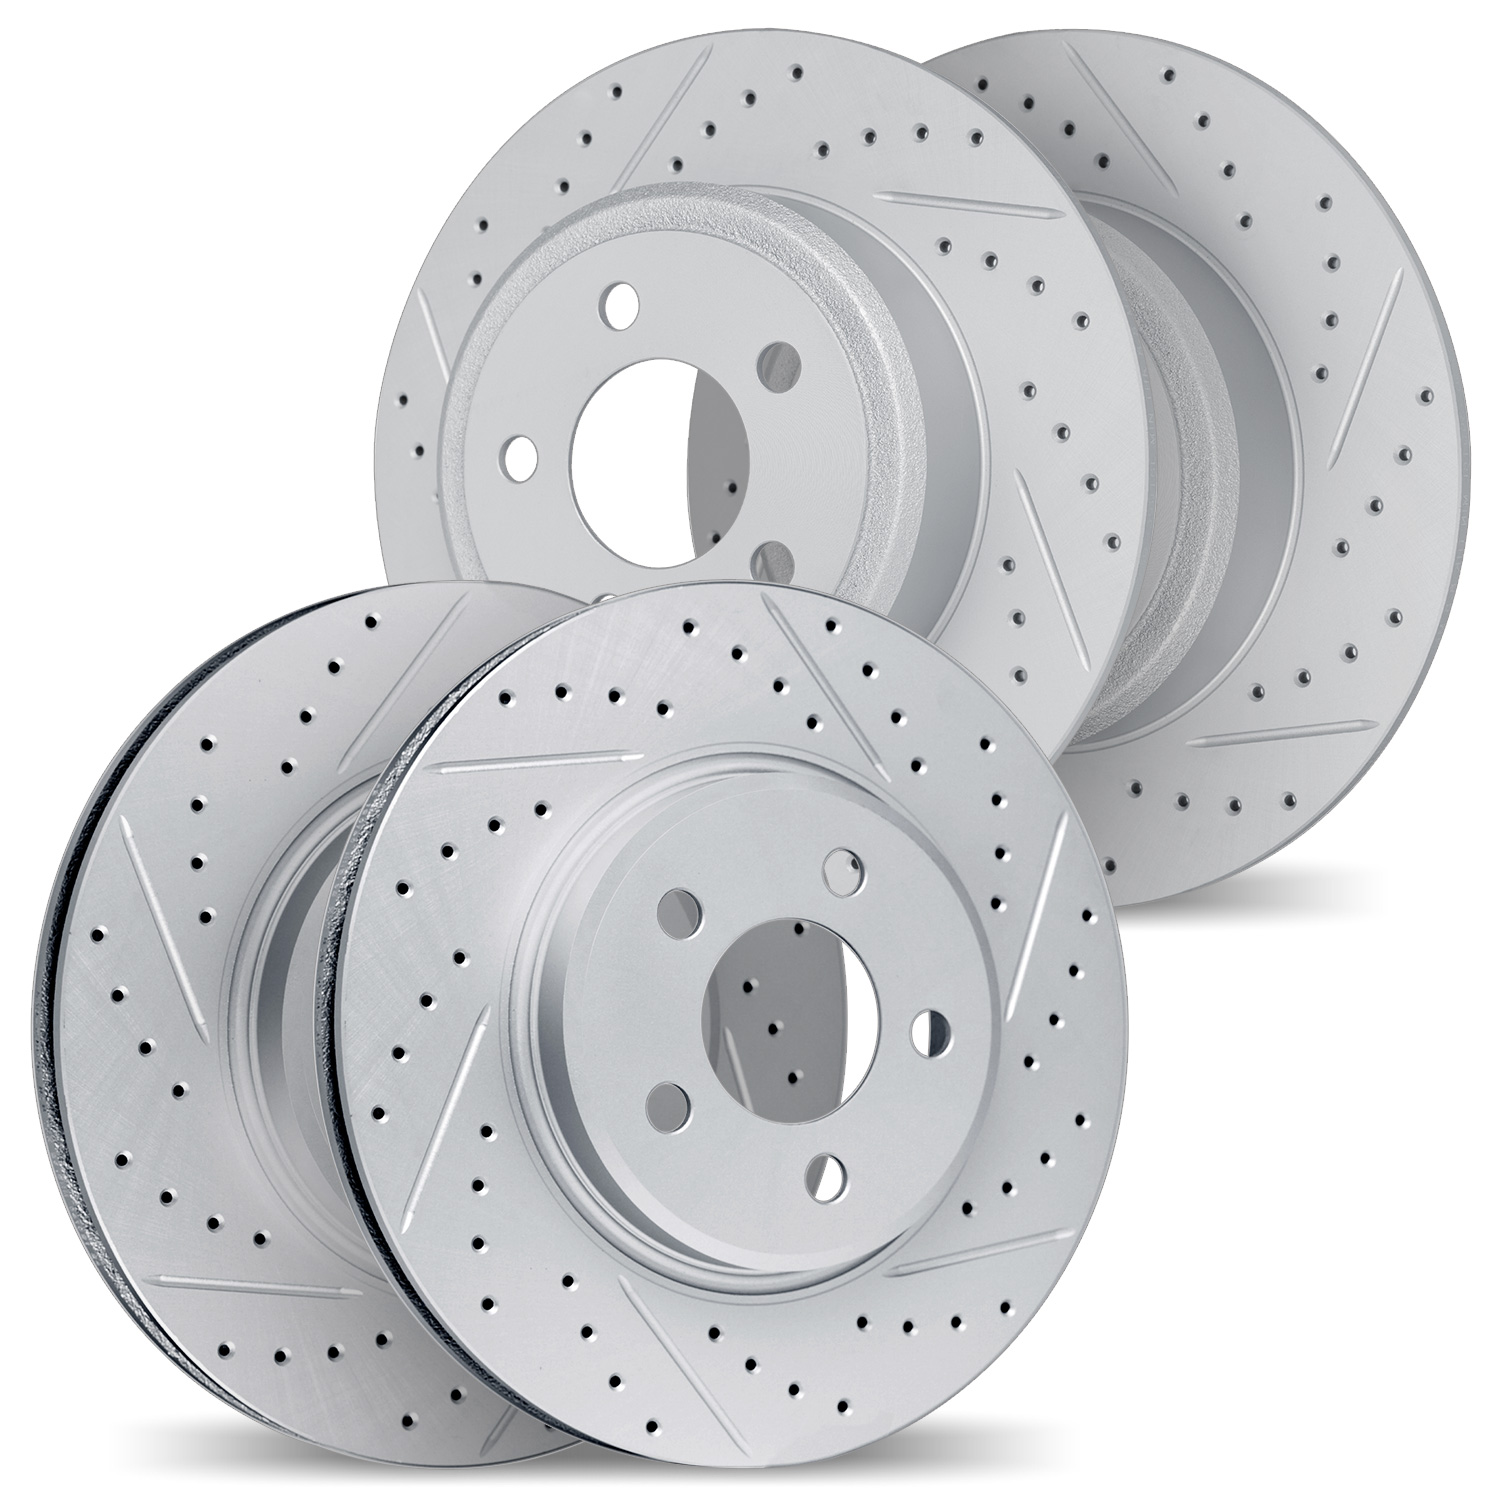 2004-27022 Geoperformance Drilled/Slotted Brake Rotors, Fits Select Volvo, Position: Front and Rear